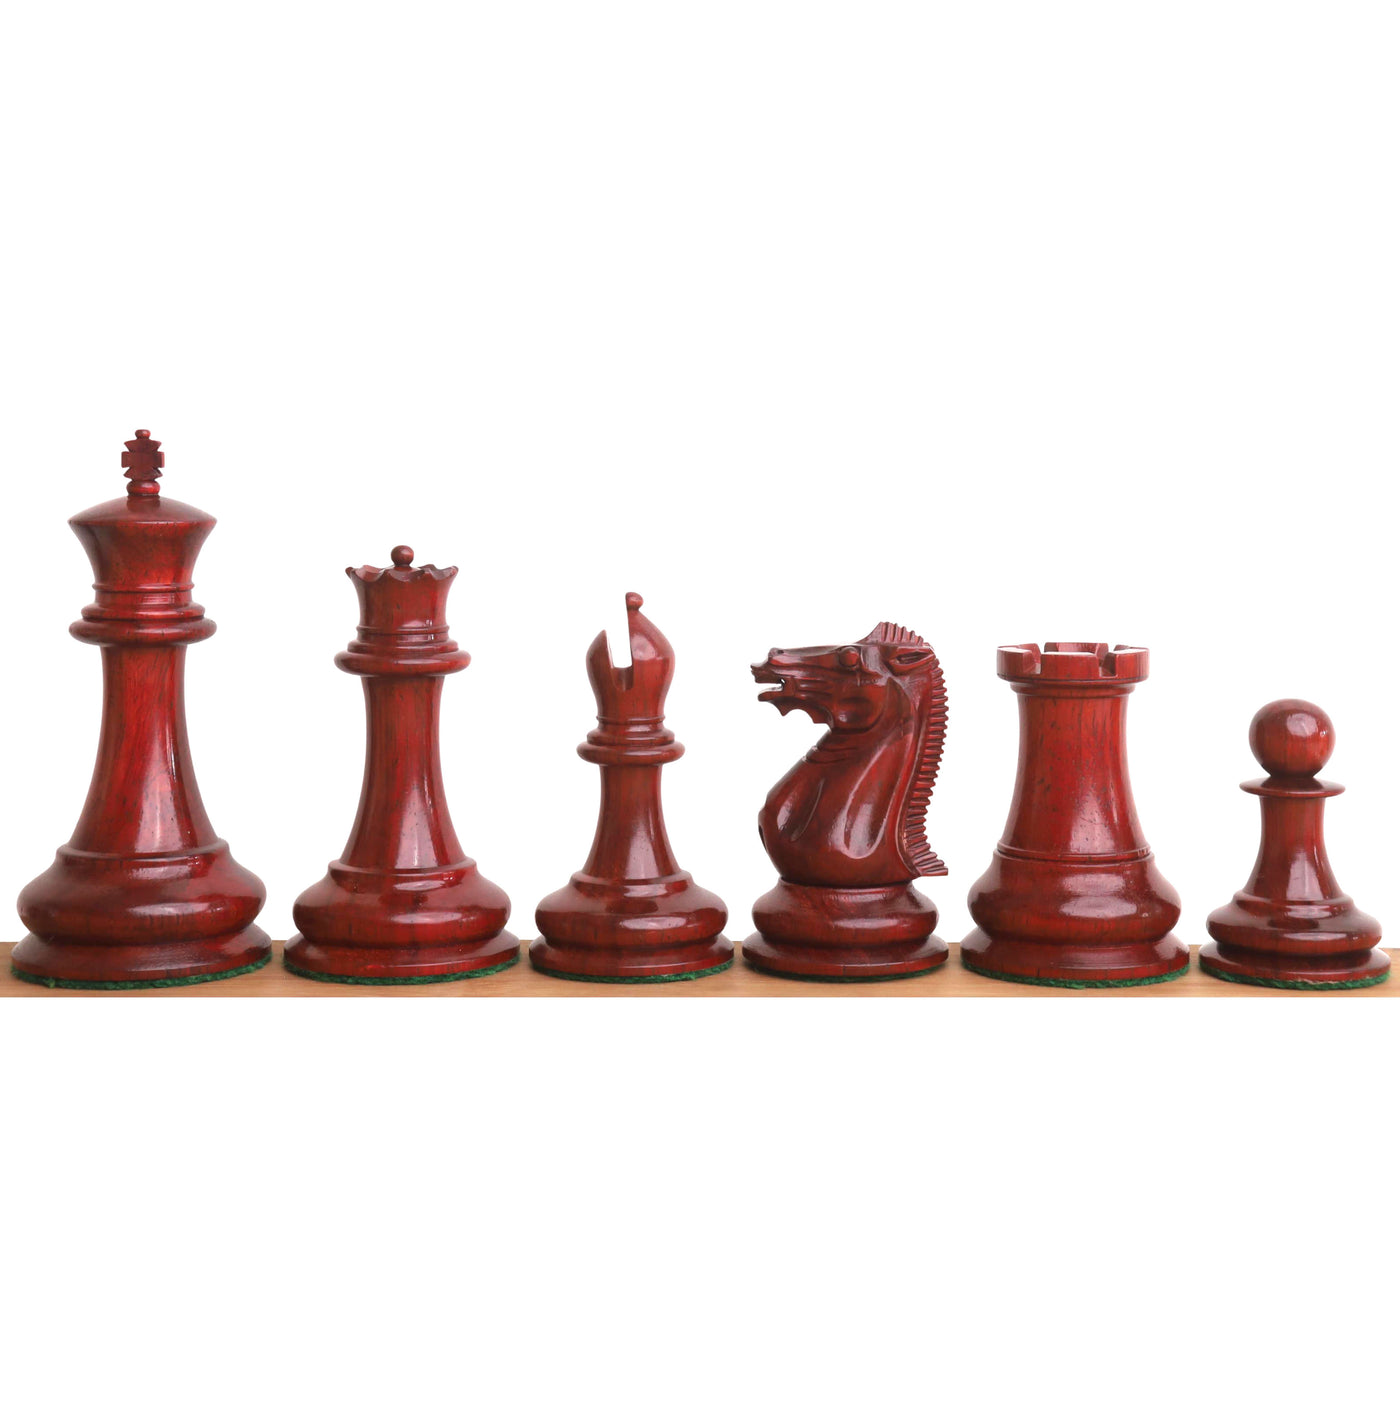 1849 Jacques Cook Staunton Collectors Chess Set - Chess Pieces Only- Bud Rosewood -3.75"